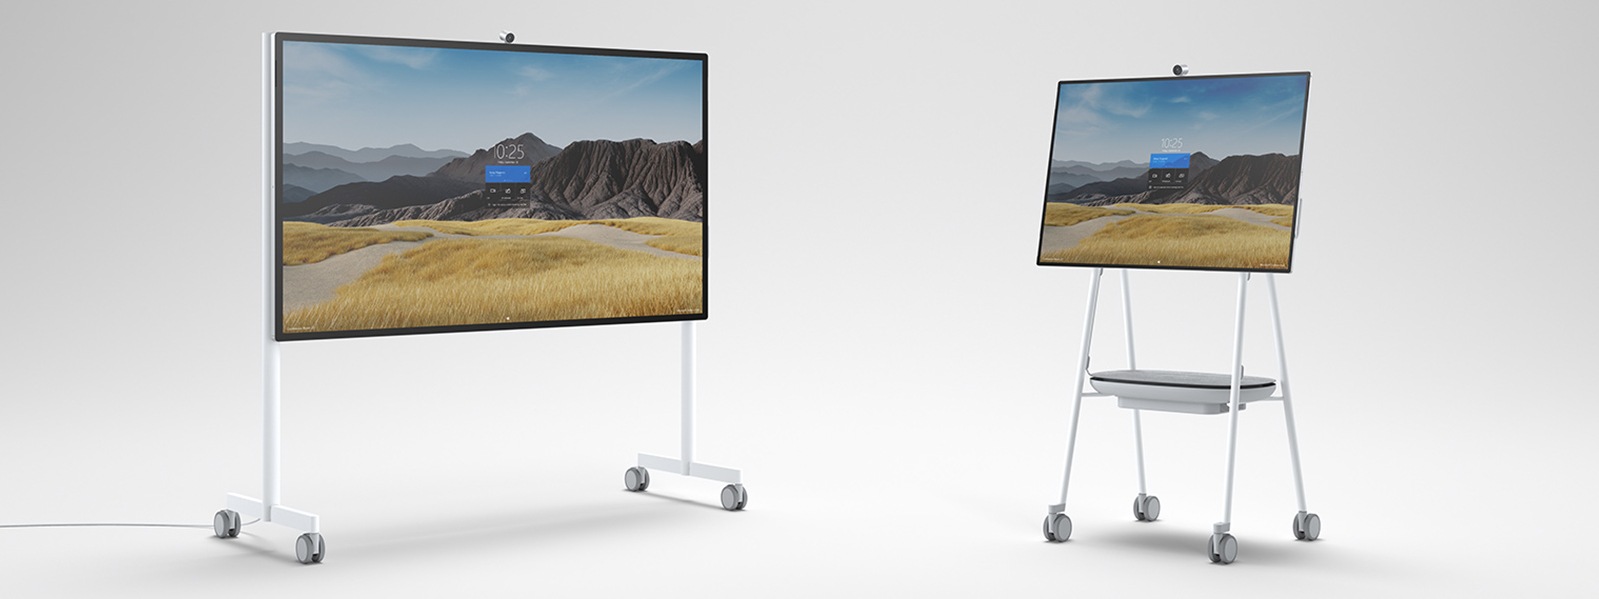 Surface Hub 2S in both 50-inch and 85-inch sizes are seen side-by-side on Steelcase Roam™ Mobile Stands